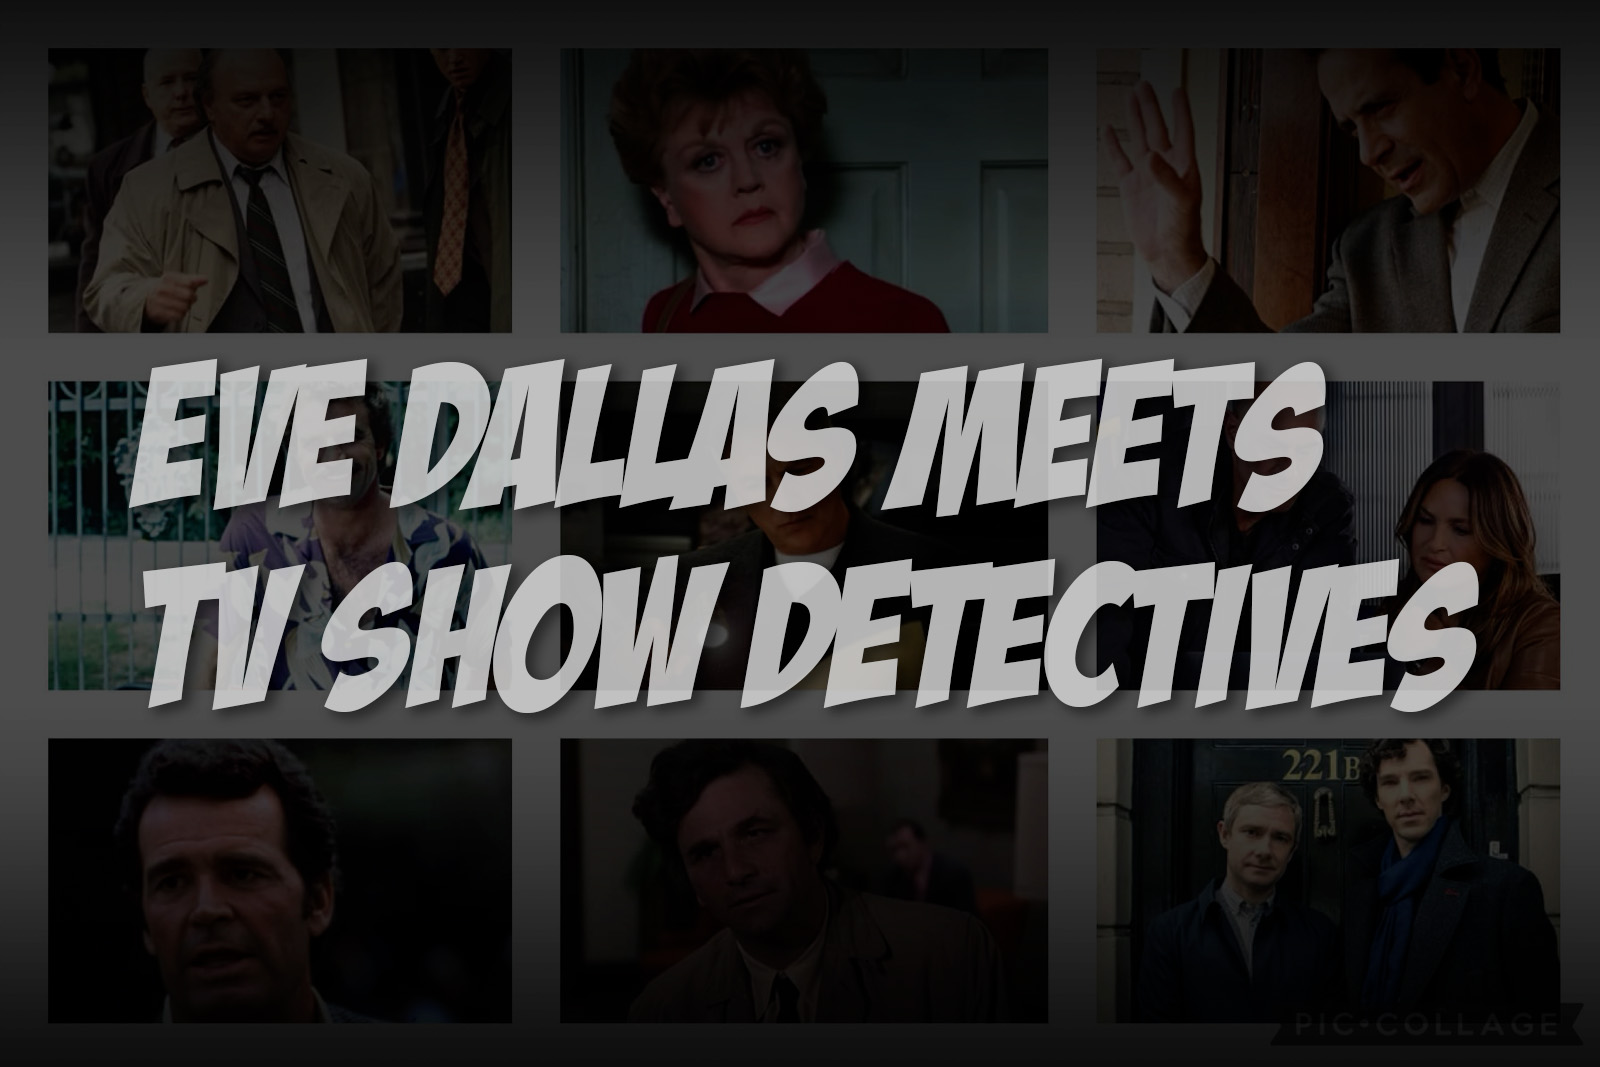 Eve Dallas and TV Show Detectives